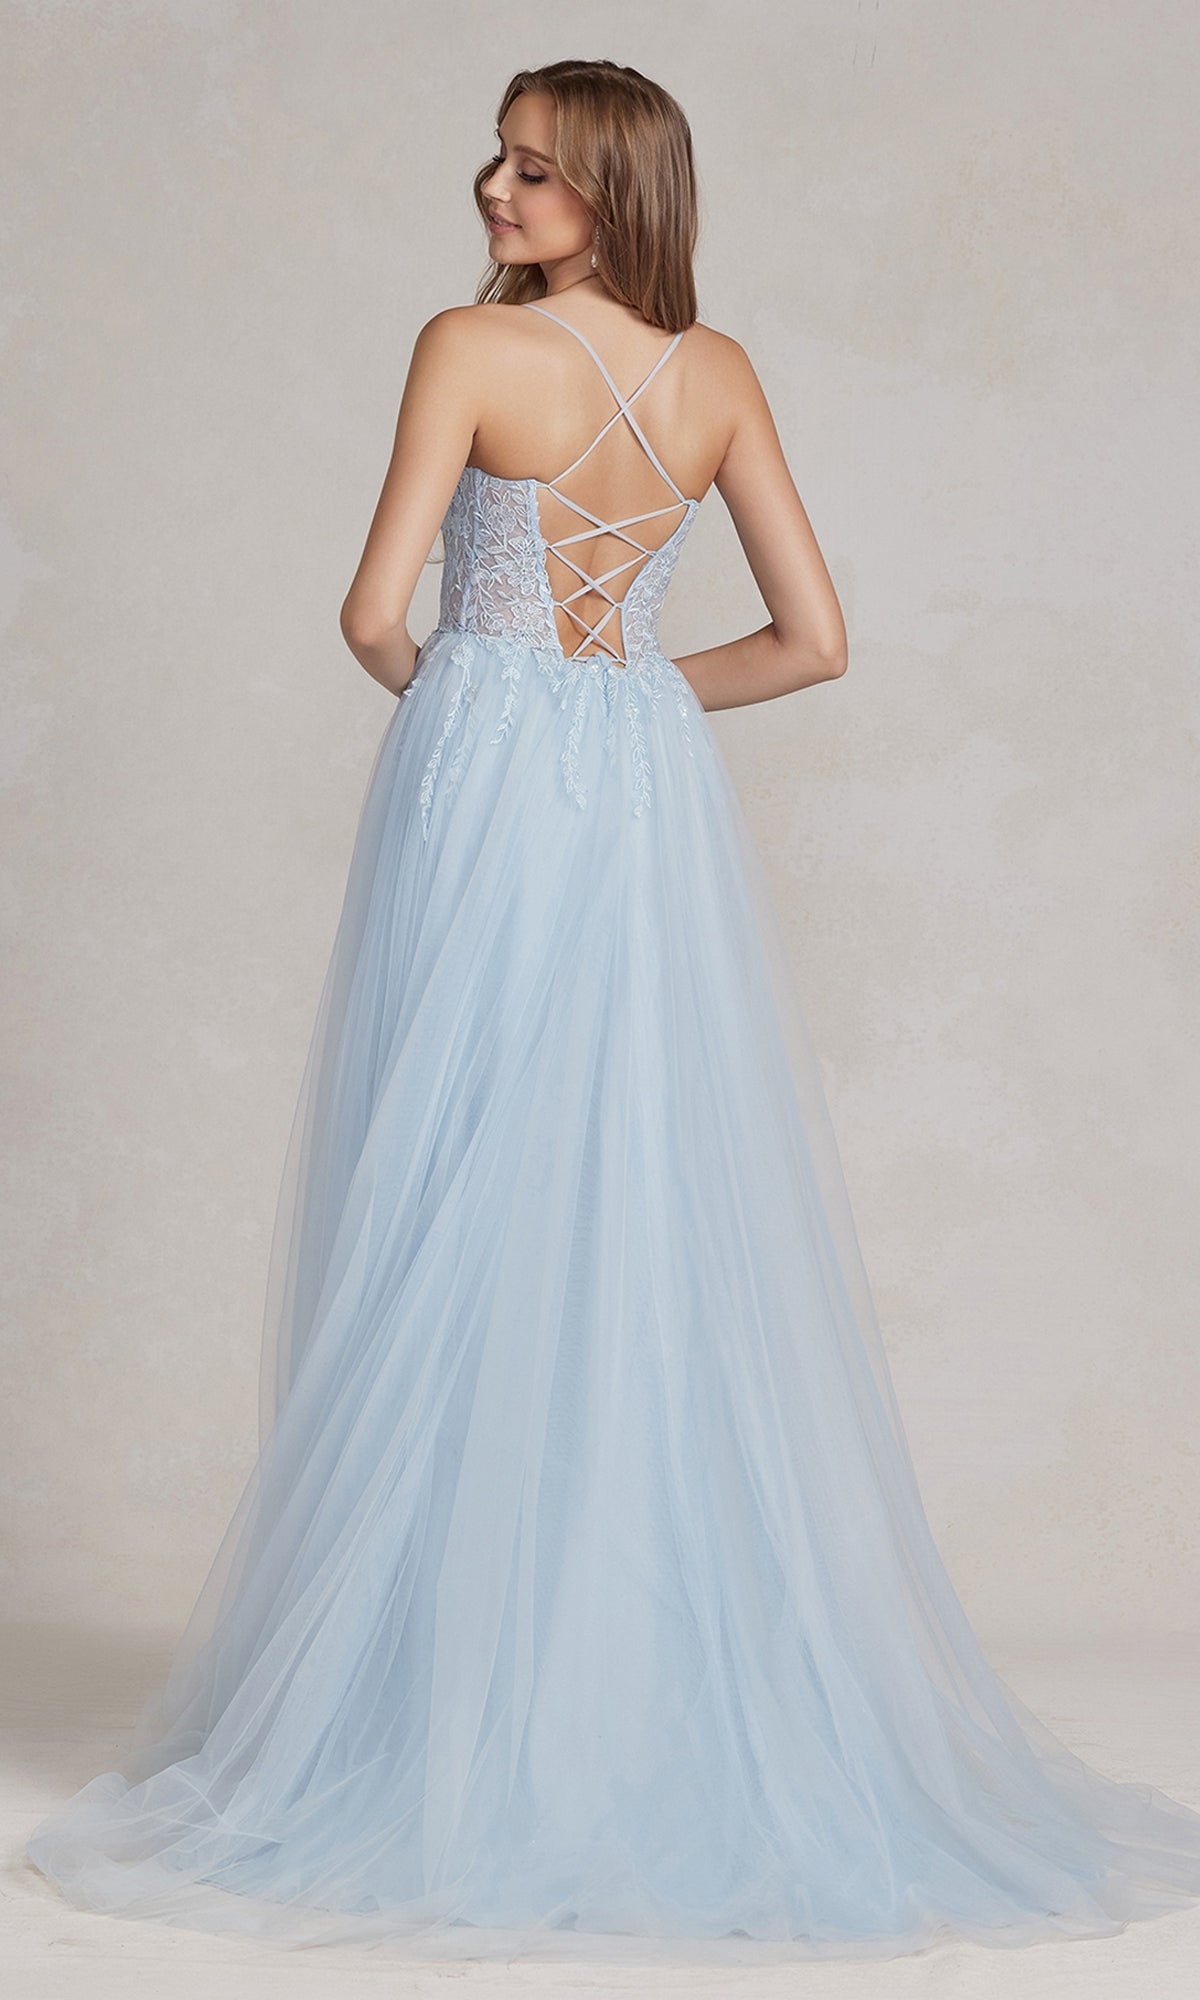  A-Line Long Lace Prom Dress with Sheer Waist